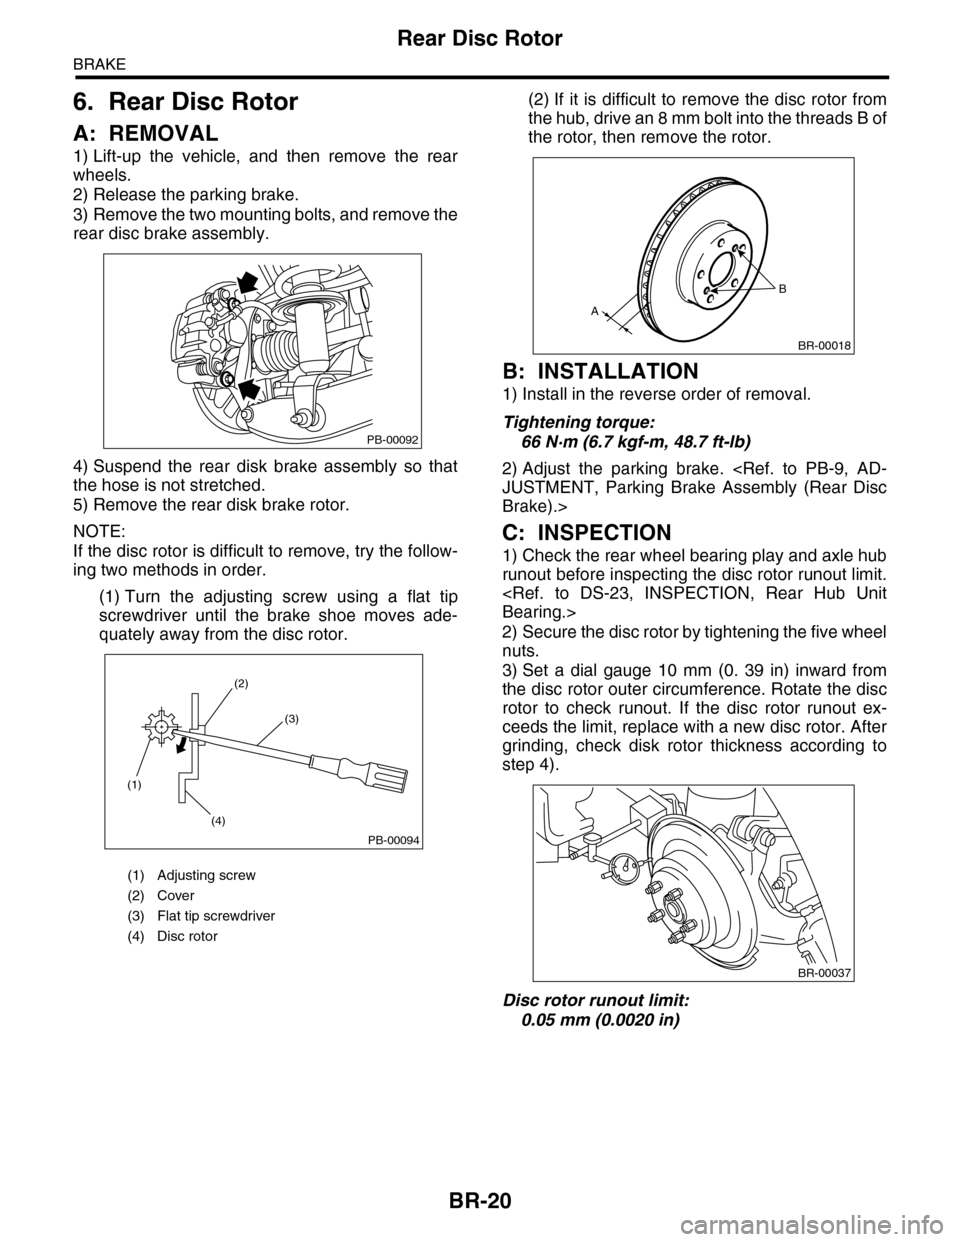 SUBARU TRIBECA 2009 1.G Service Workshop Manual BR-20
Rear Disc Rotor
BRAKE
6. Rear Disc Rotor
A: REMOVAL
1) Lift-up  the  vehicle,  and  then  remove  the  rear
wheels.
2) Release the parking brake.
3) Remove the two mounting bolts, and remove the